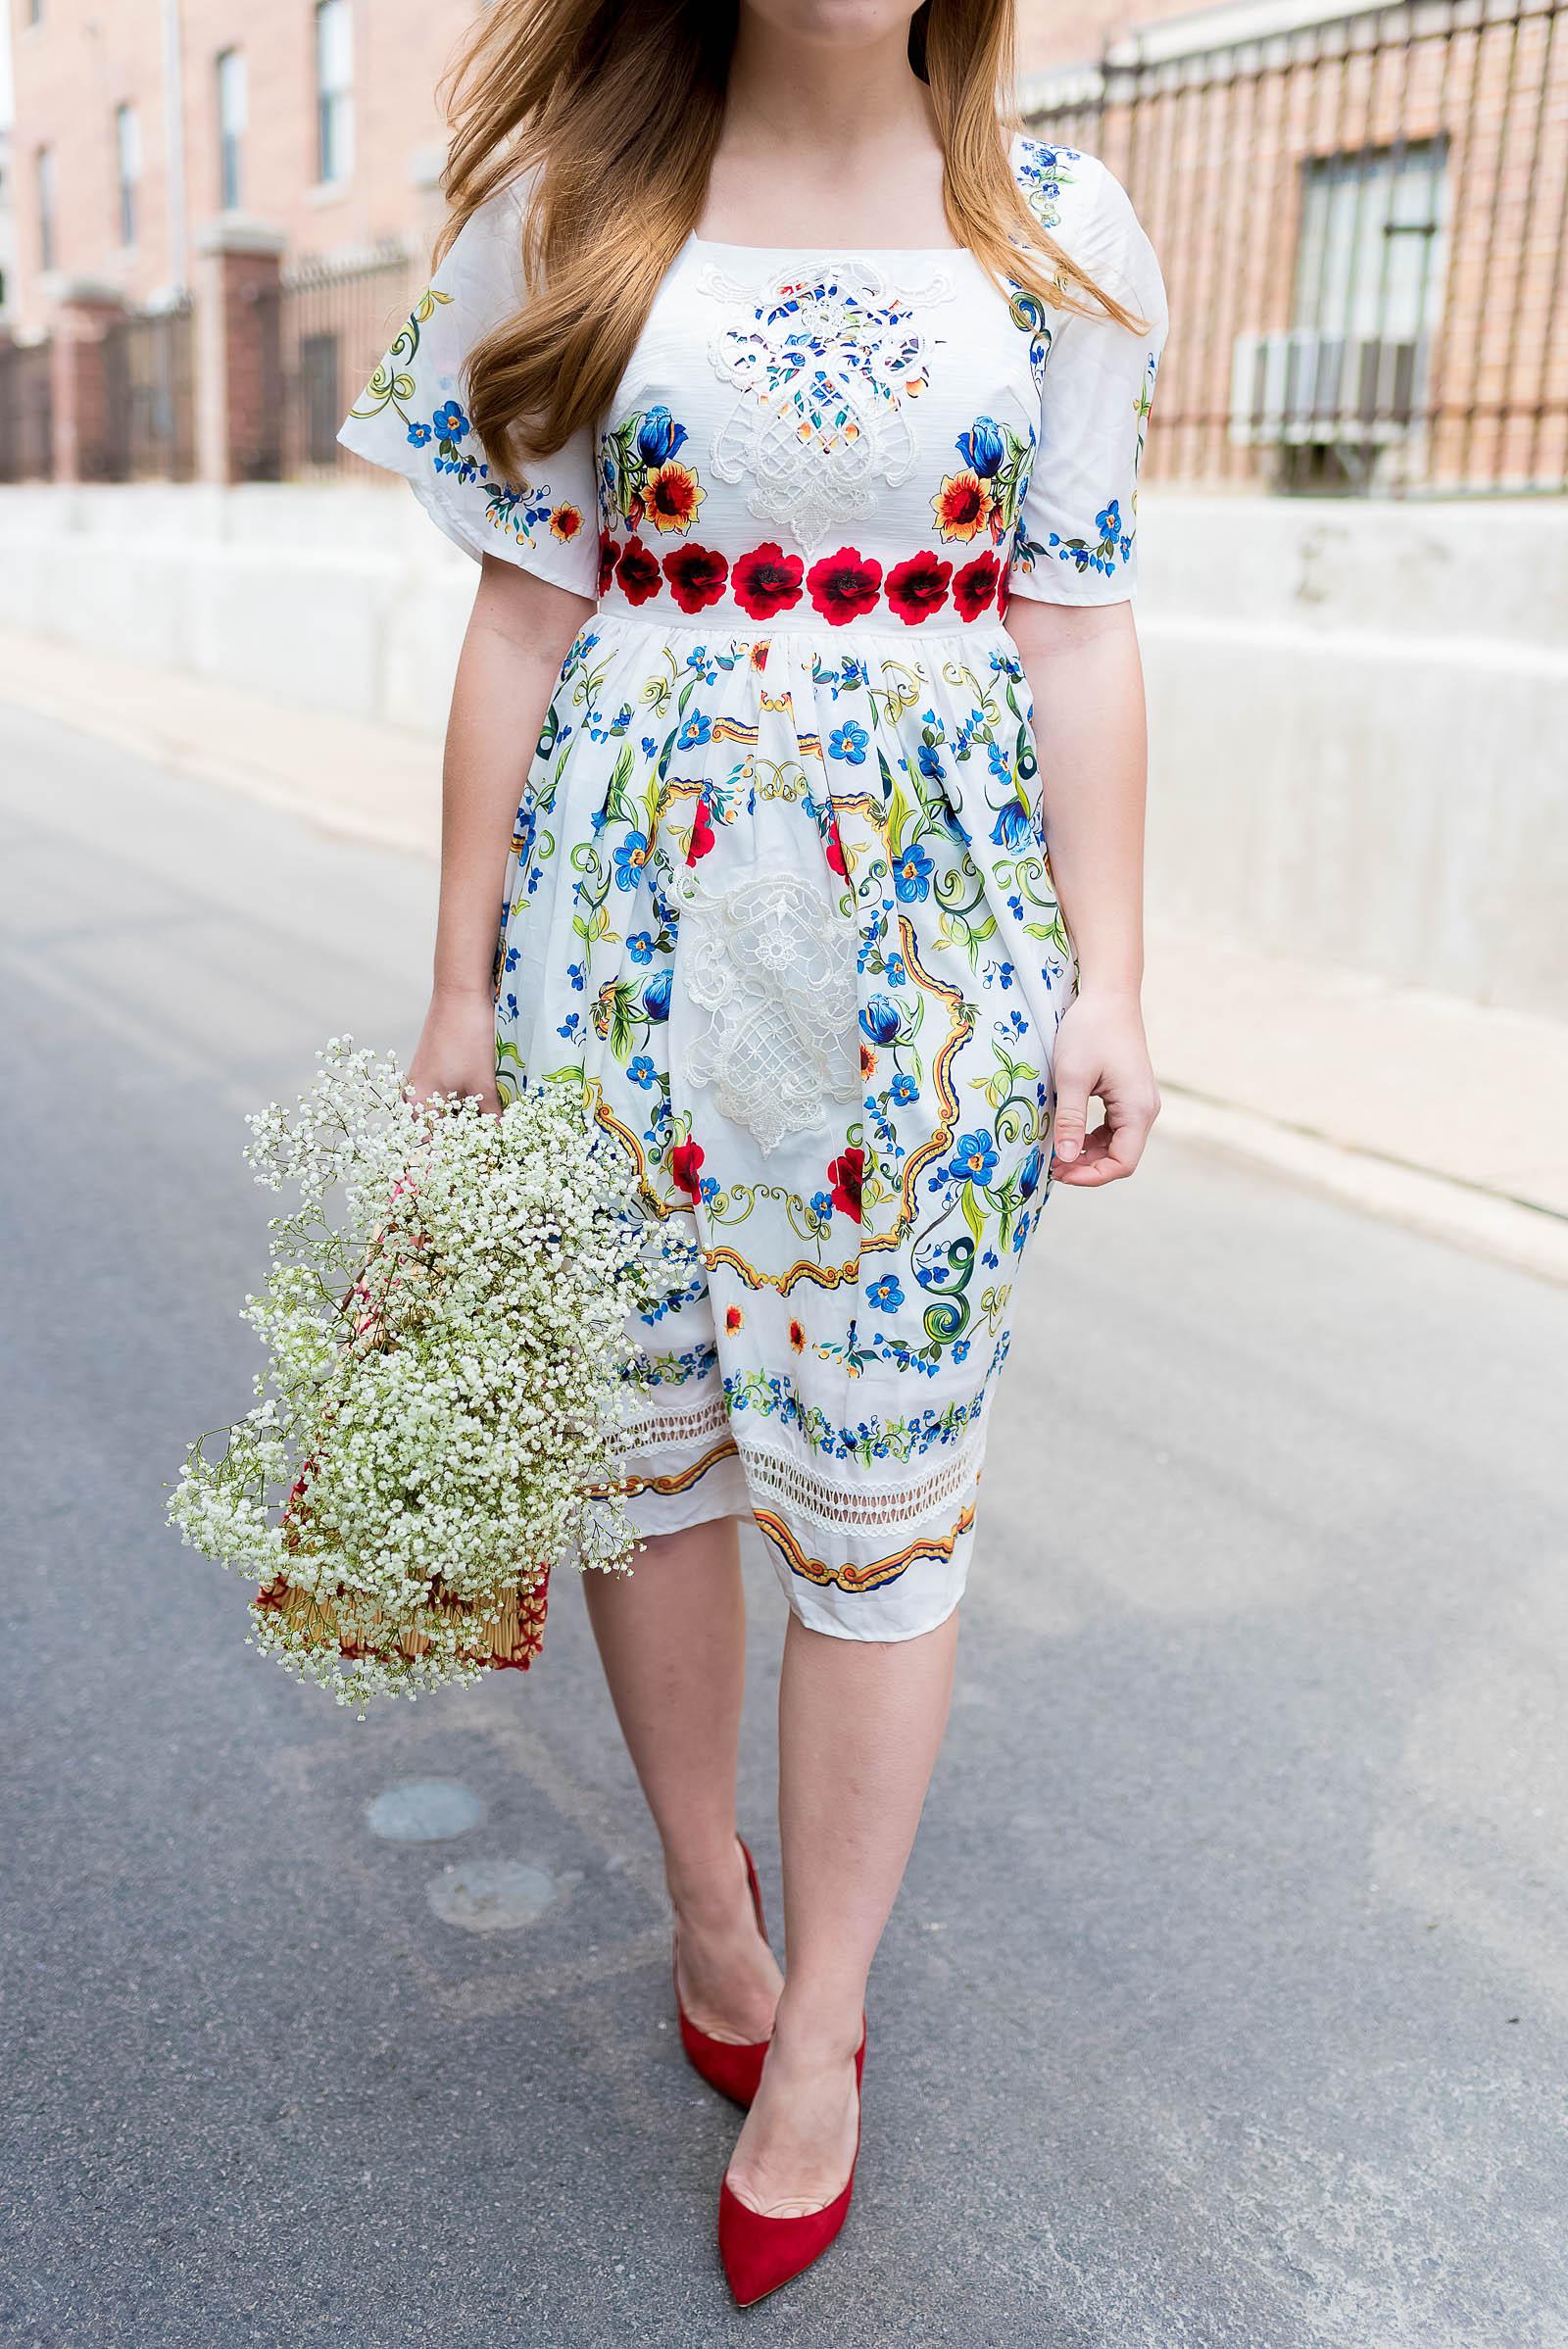 Mexican Floral Dress Style Inspiration